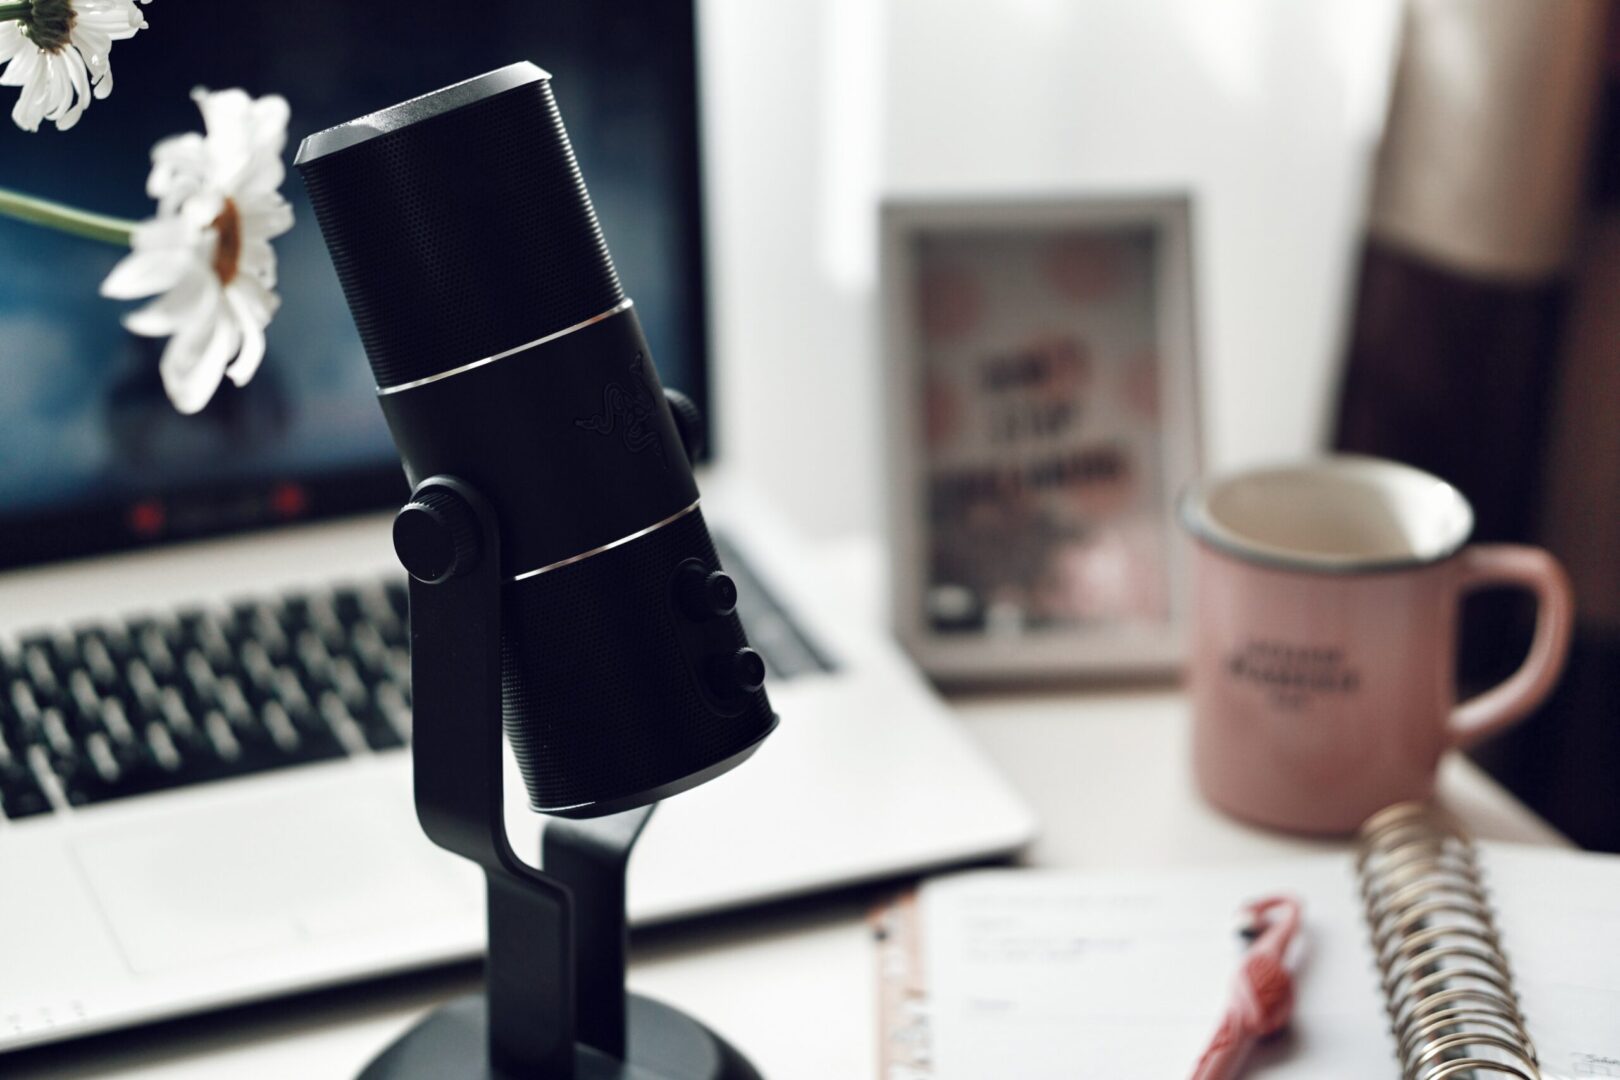 microphone and stationary items on desk